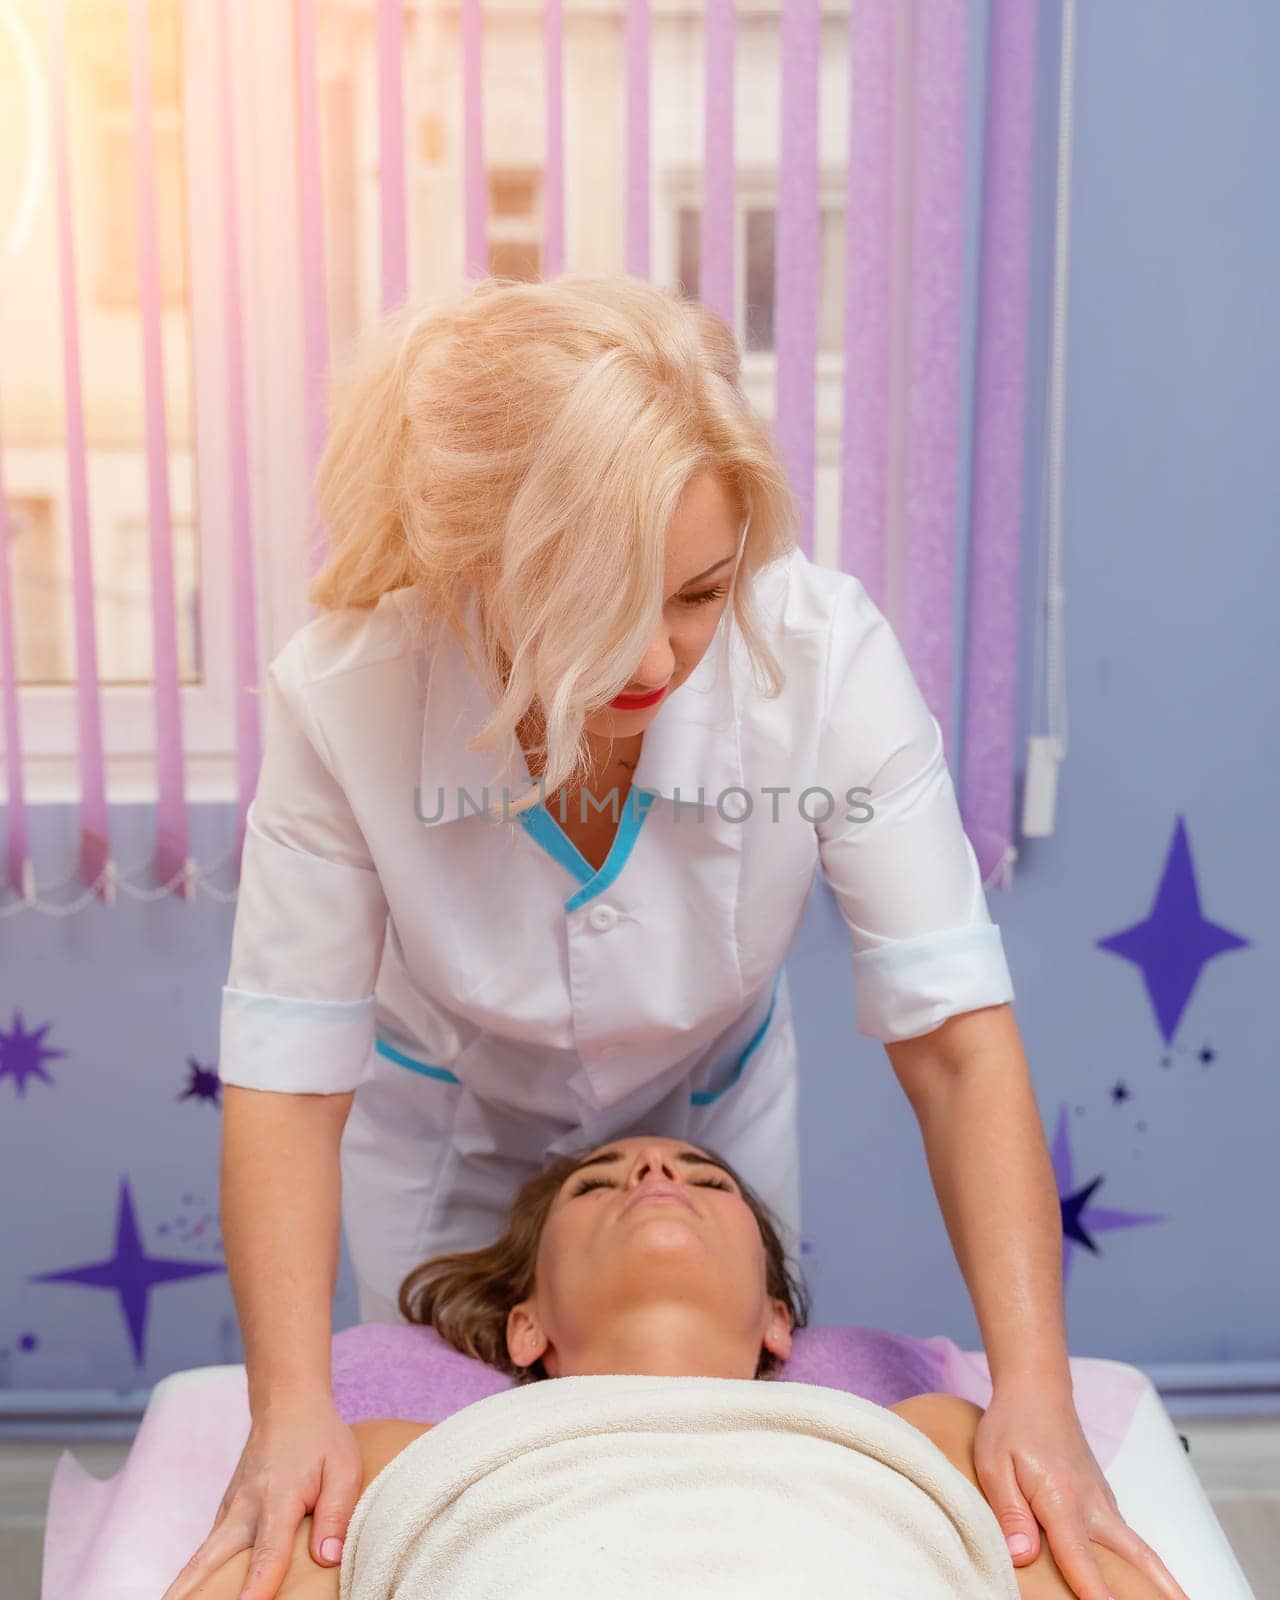 Masseur woman massages her shoulders. Woman getting a massage at the spa.